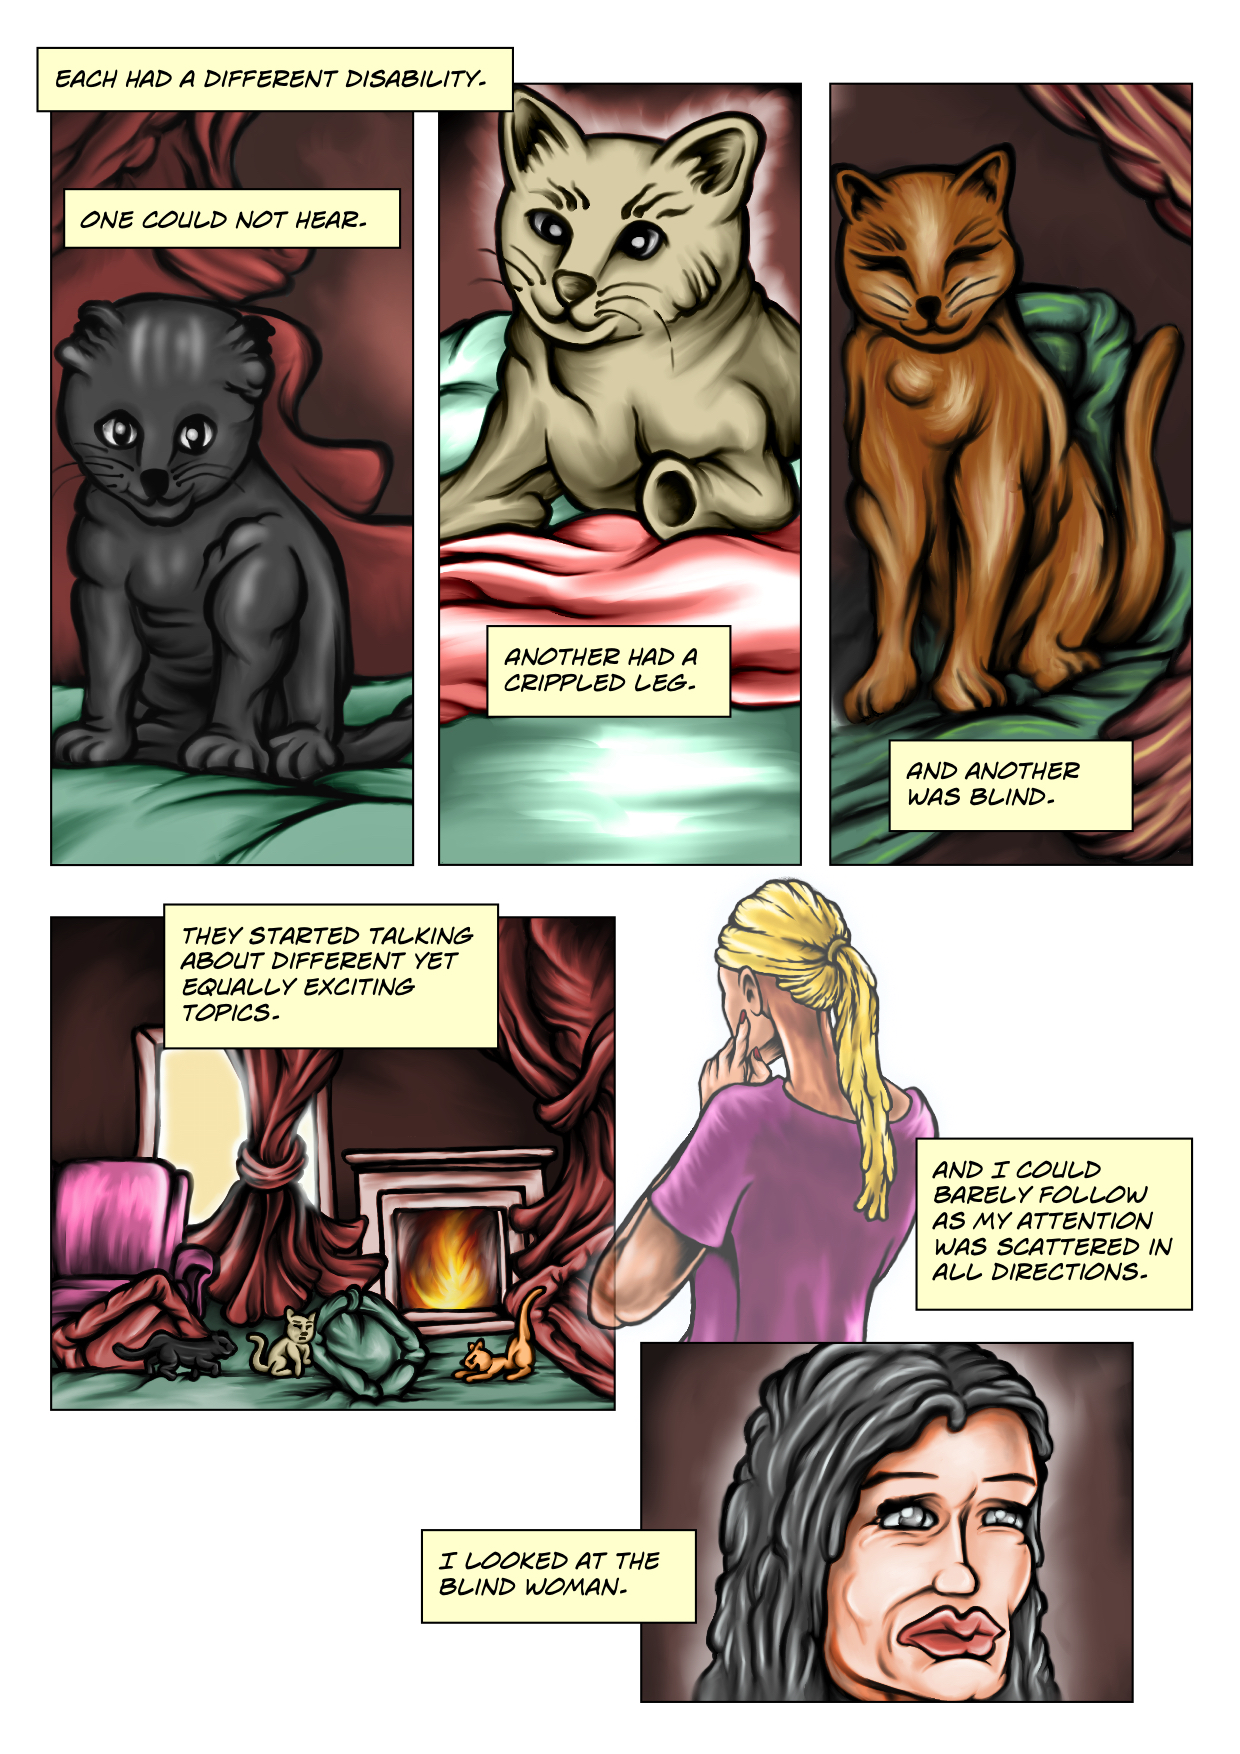 The Blind Woman and Cats - Page 2